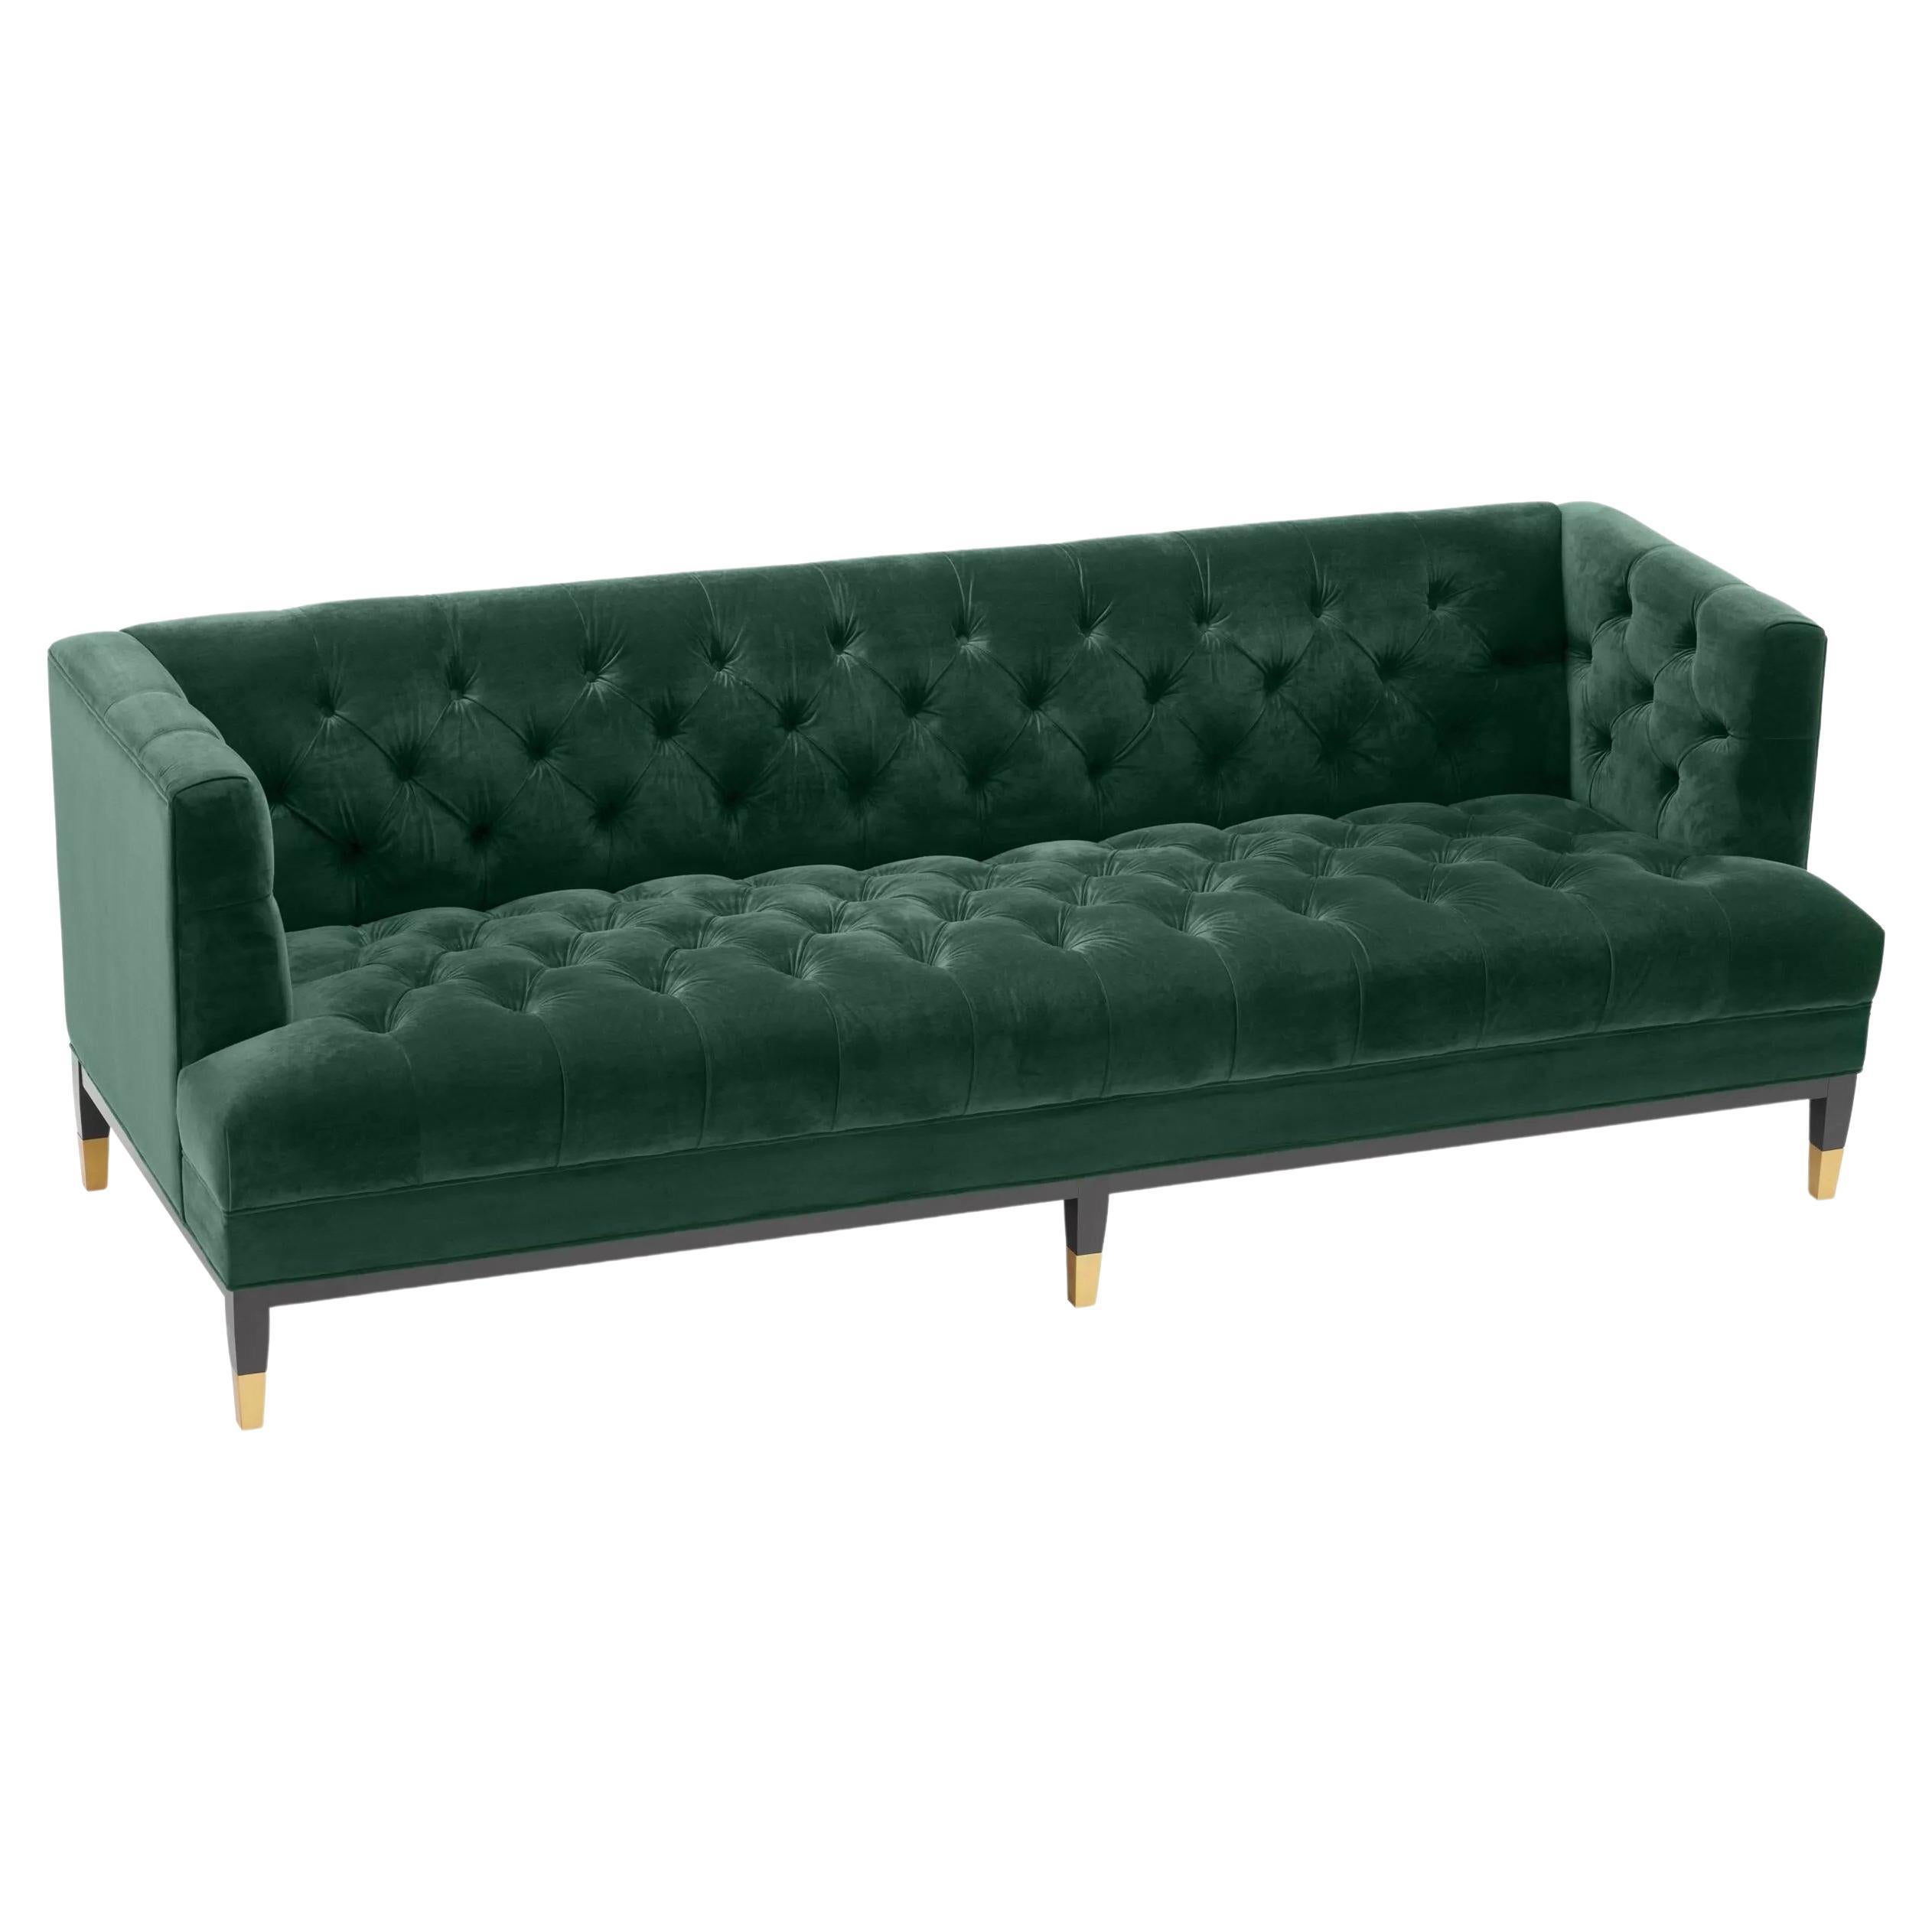 Green Velvet and Black Wooden Feet with Brass Finishes Chesterfield Style Sofa